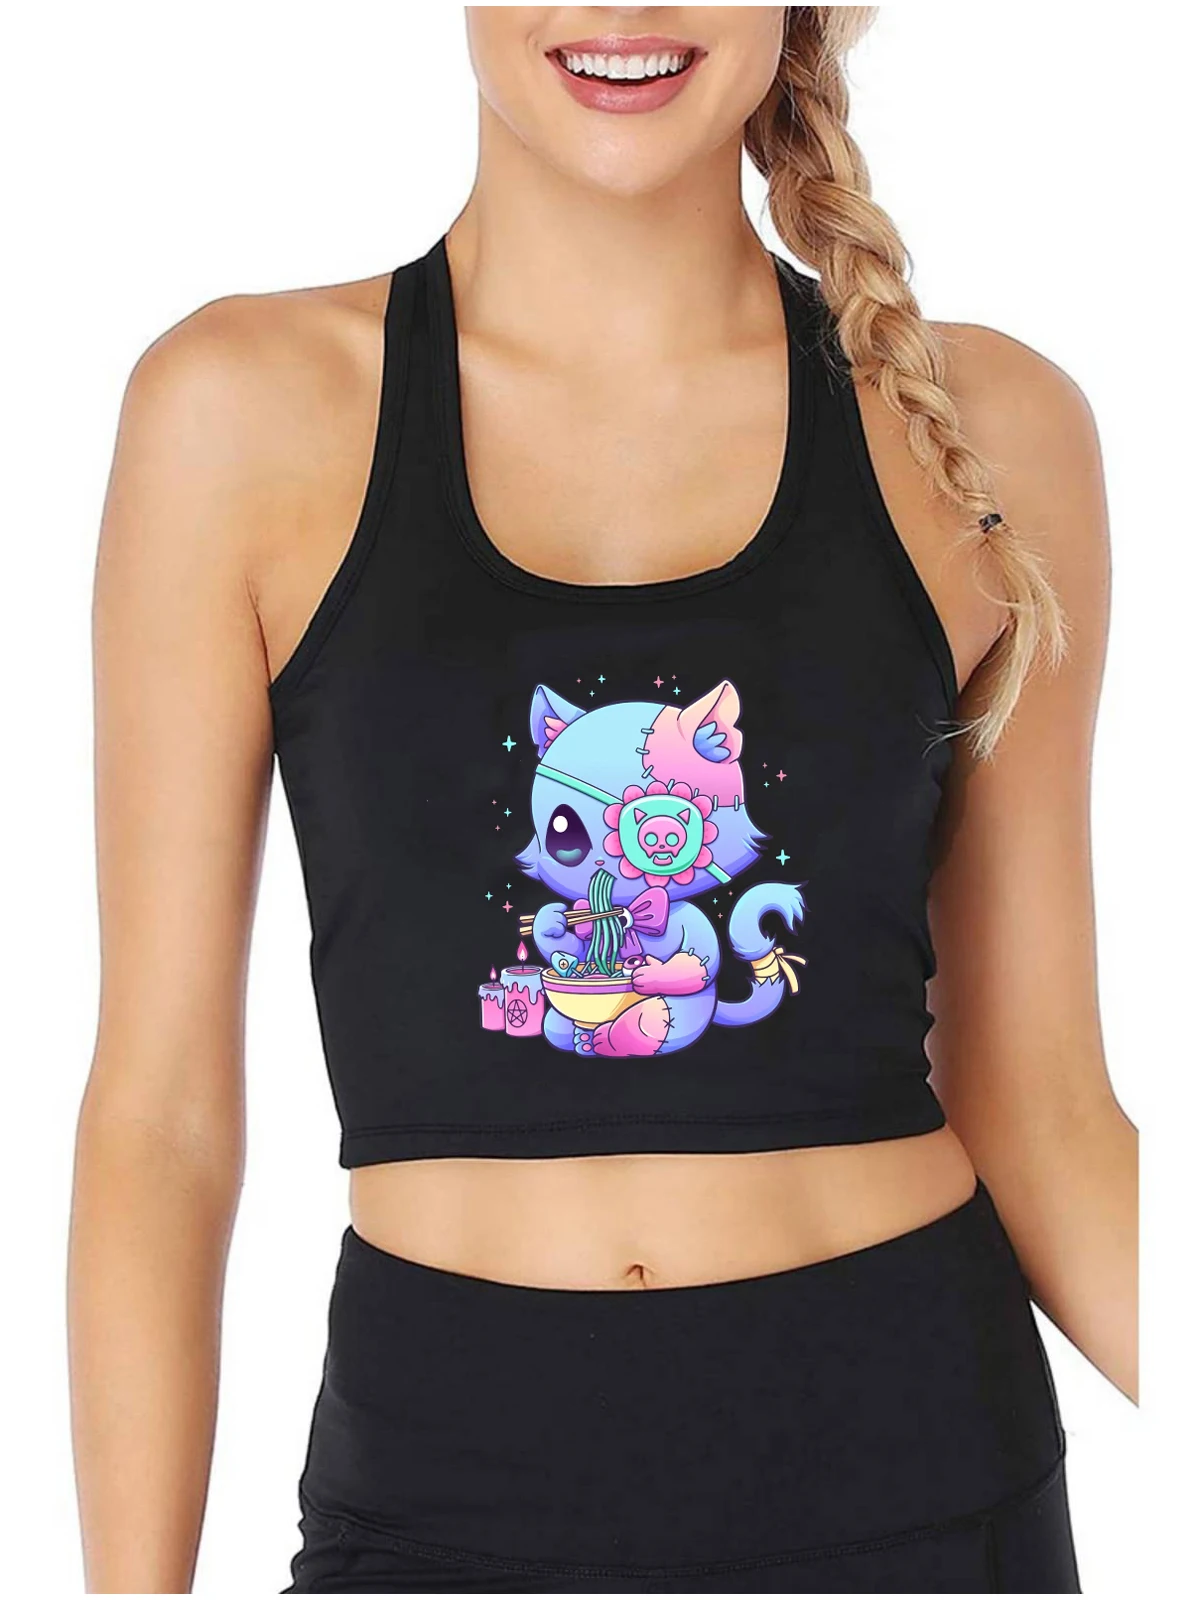 

Pastel Goth Aesthetic Kawaii Creepy Cat Eating Ram Graphics Design Crop Top Japanese Anime Gothic Sexy Slim Fit Tank Tops